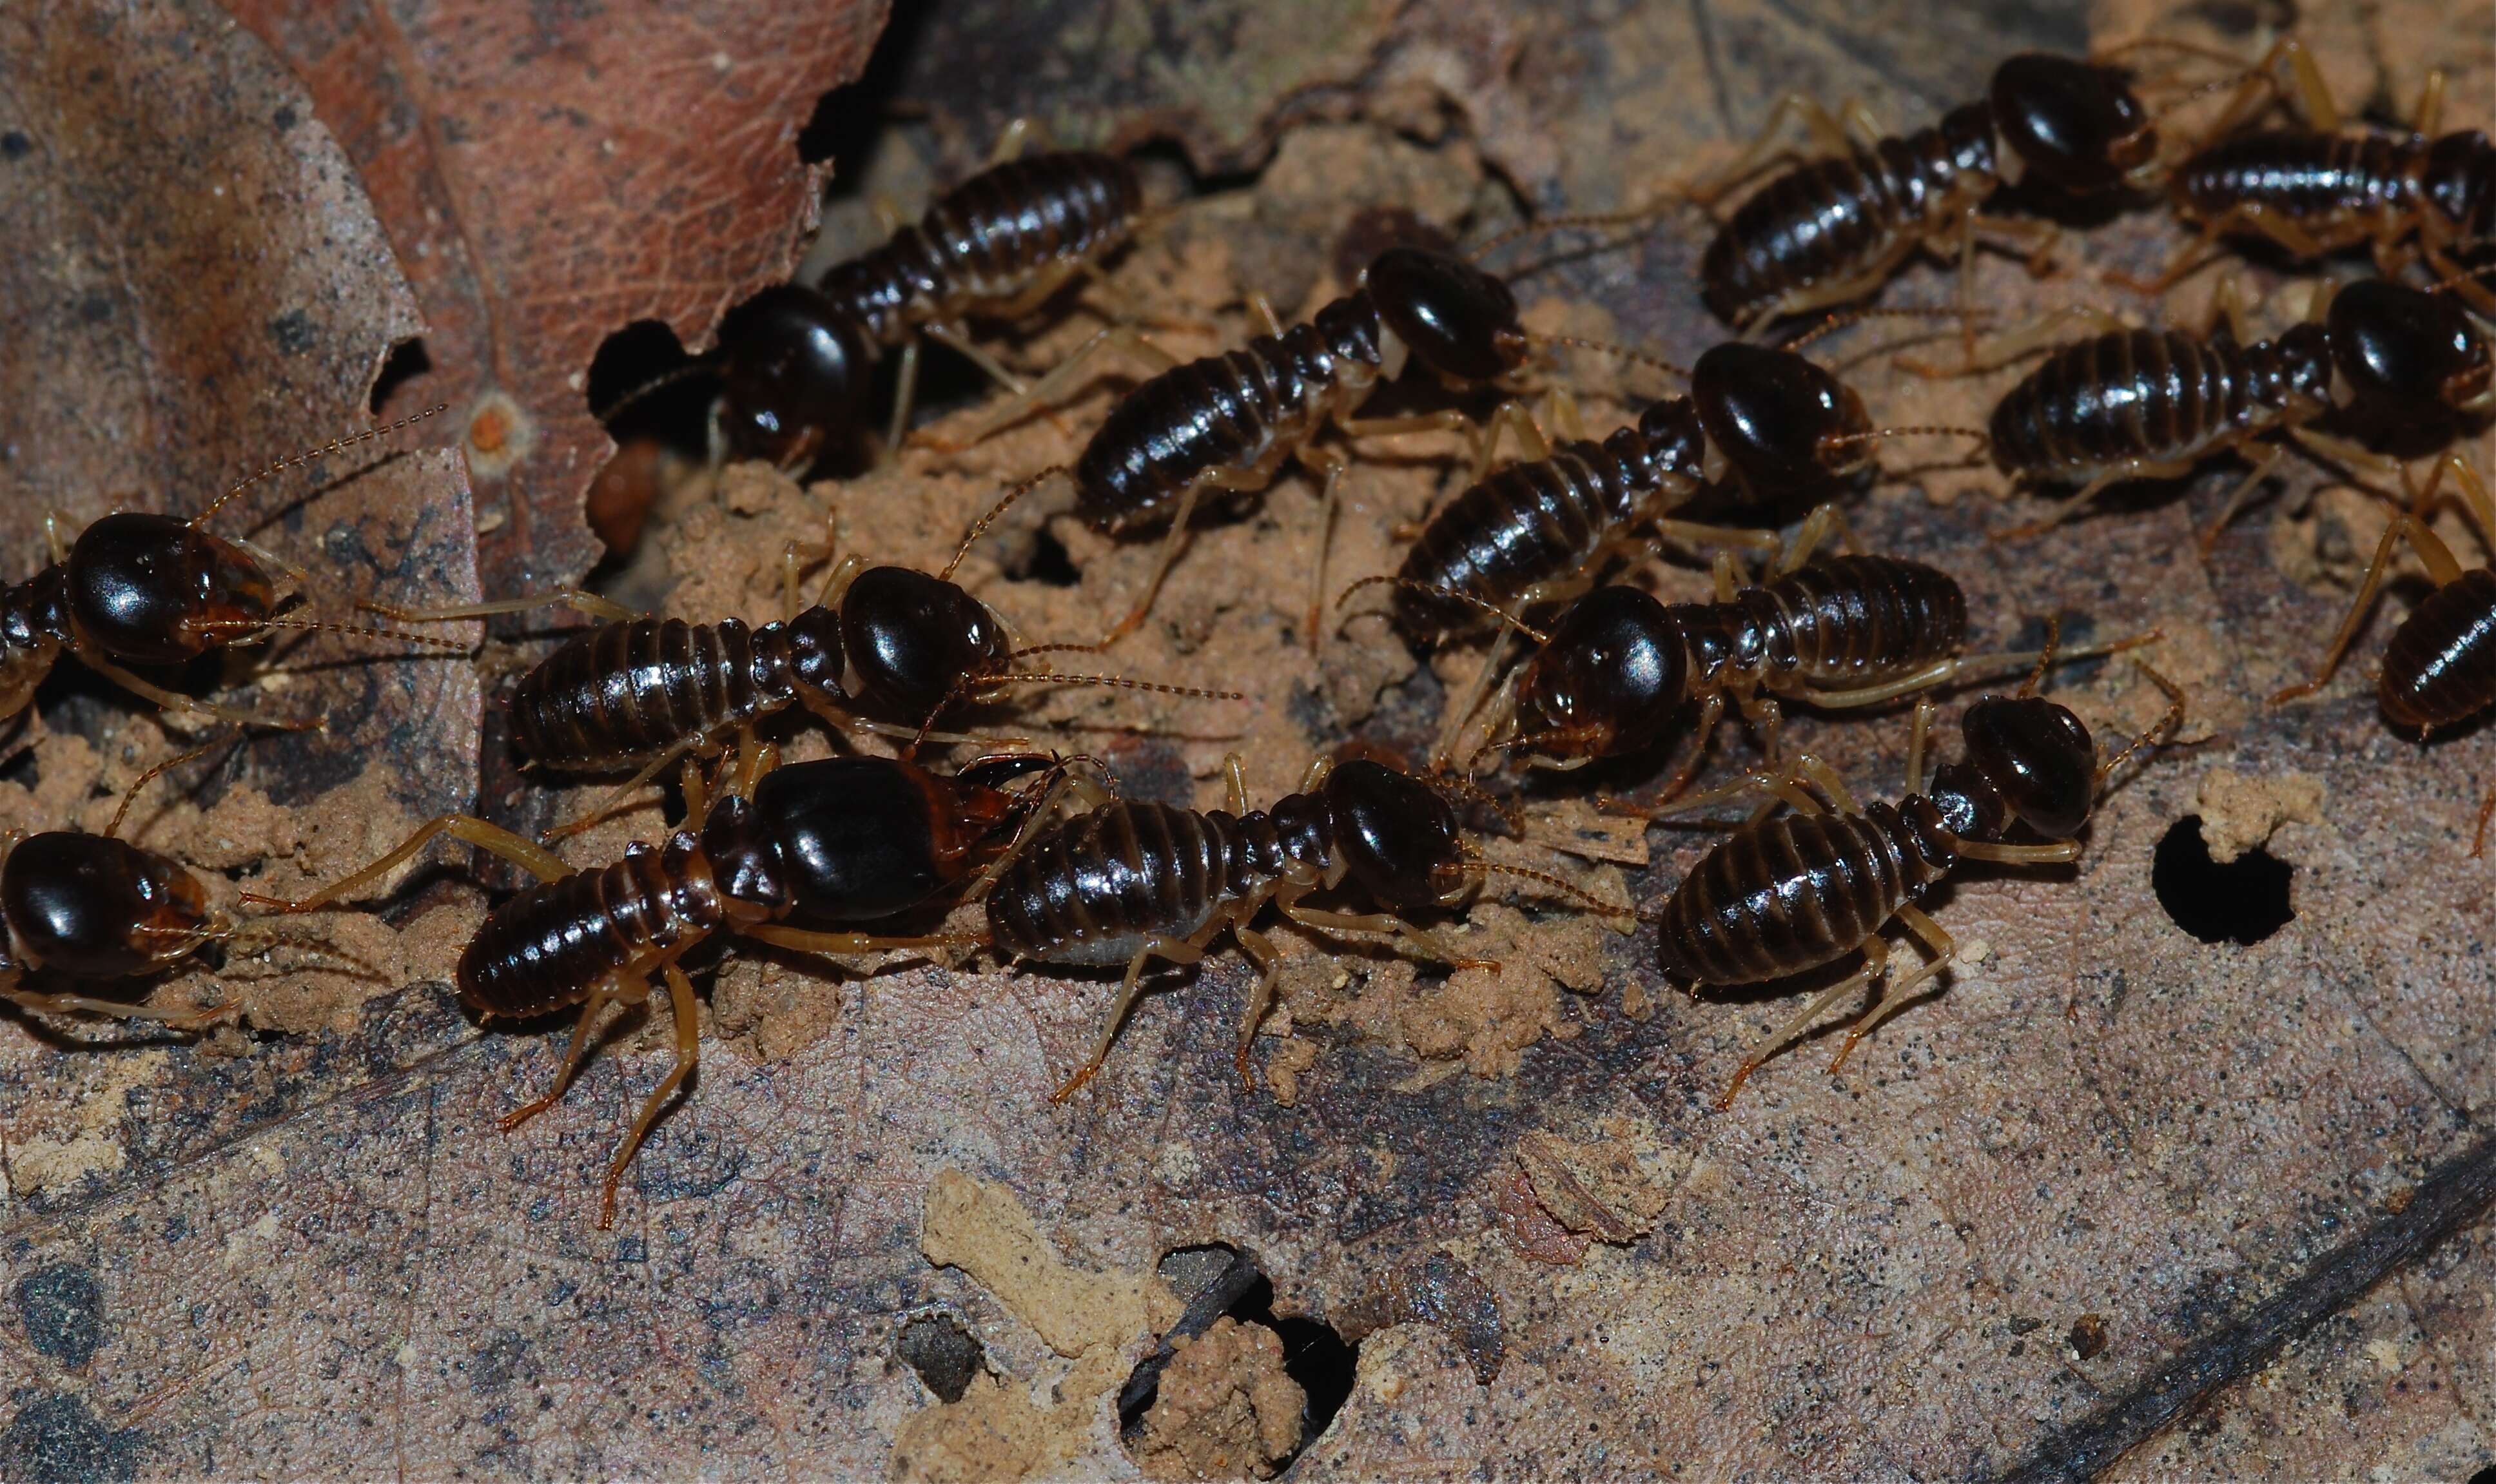 Image of higher termites